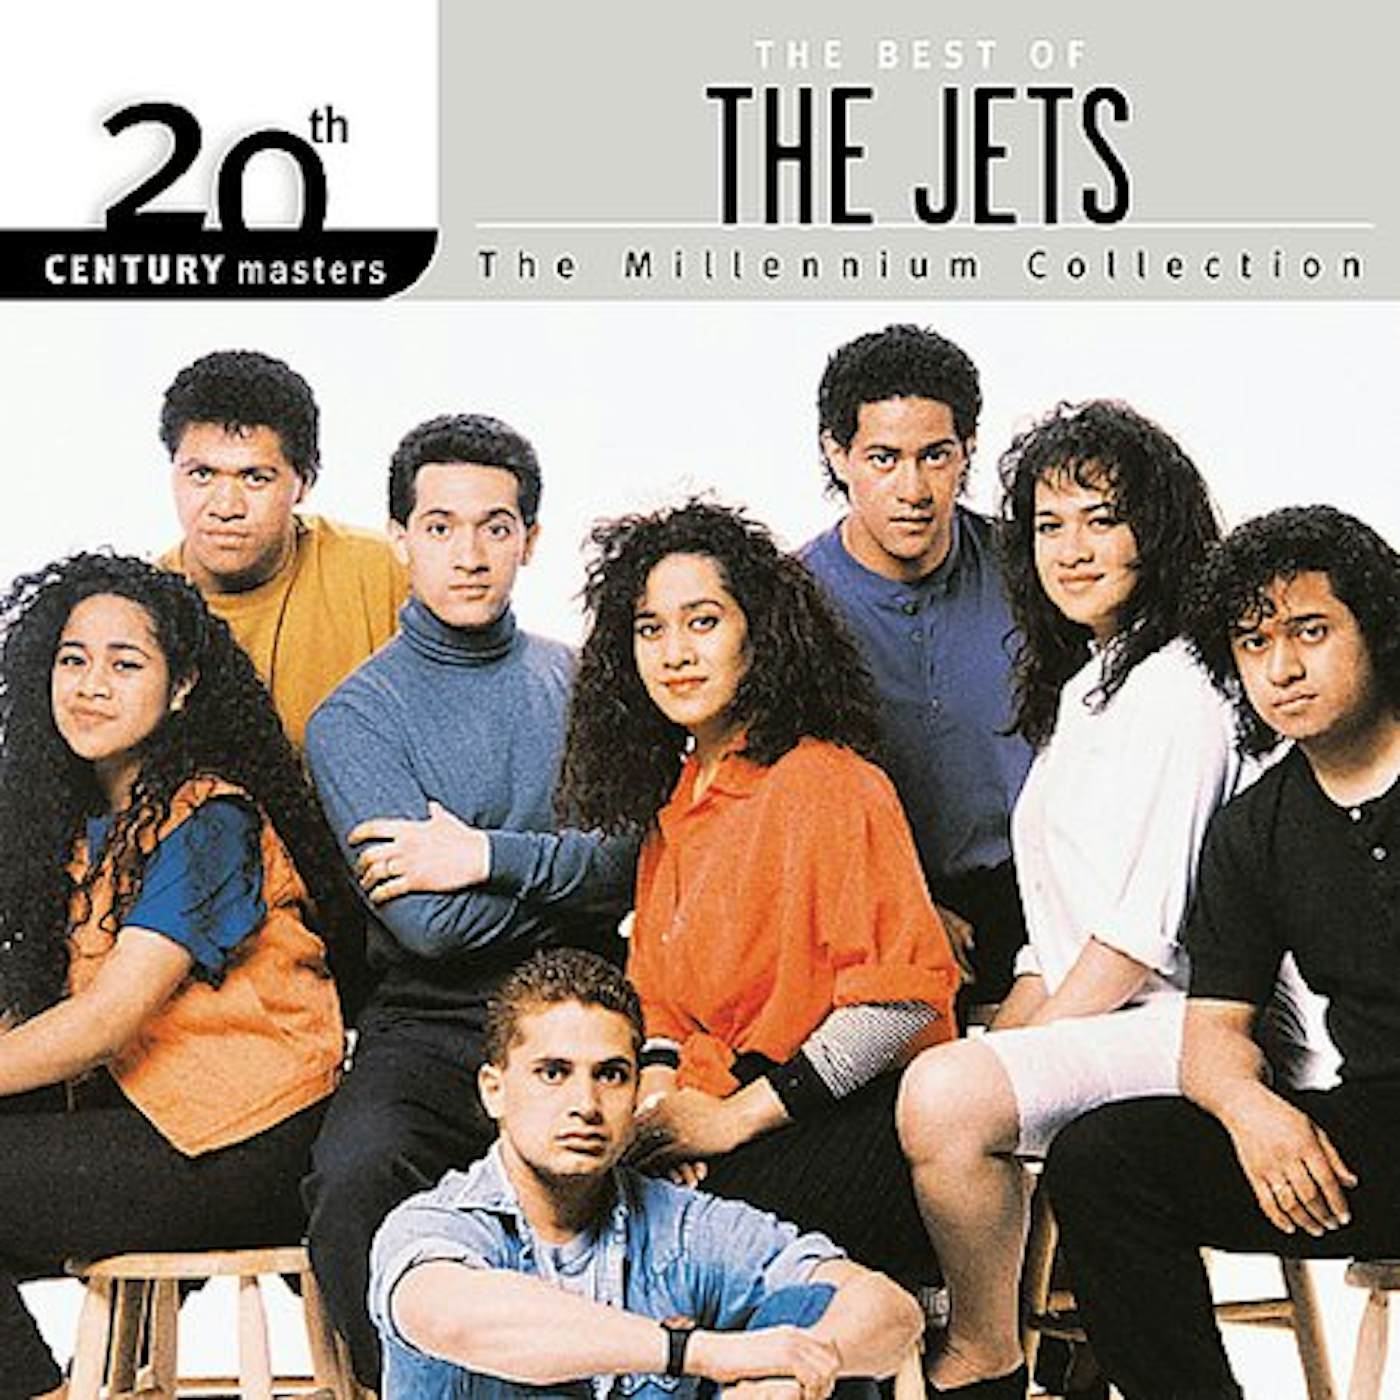 Jets 20TH CENTURY MASTERS: MILLENNIUM COLLECTION CD